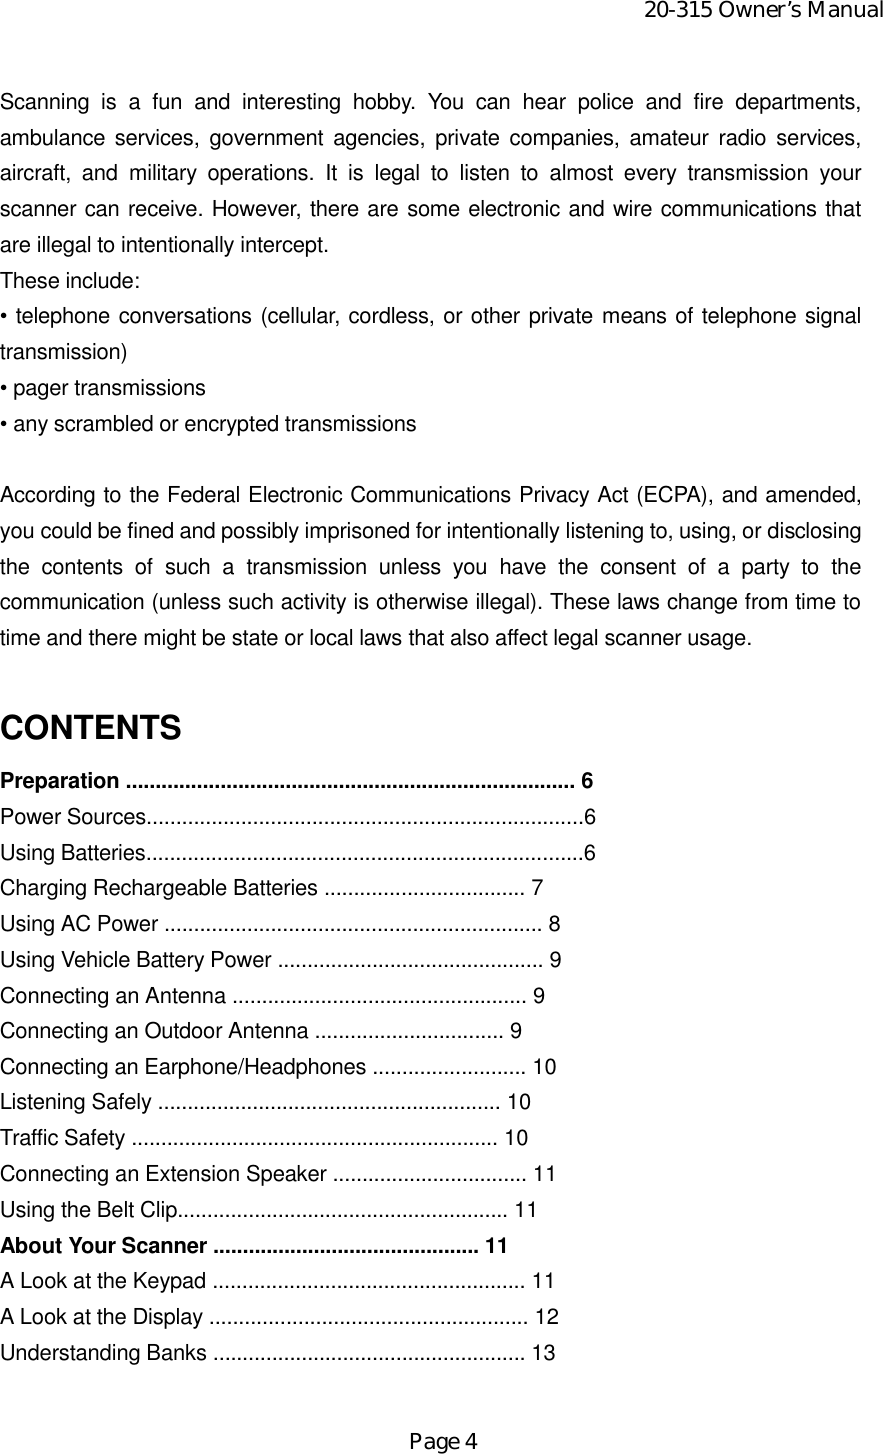 20-315 Owner’s ManualPage 4Scanning is a fun and interesting hobby. You can hear police and fire departments,ambulance services, government agencies, private companies, amateur radio services,aircraft, and military operations. It is legal to listen to almost every transmission yourscanner can receive. However, there are some electronic and wire communications thatare illegal to intentionally intercept.These include:• telephone conversations (cellular, cordless, or other private means of telephone signaltransmission)• pager transmissions• any scrambled or encrypted transmissionsAccording to the Federal Electronic Communications Privacy Act (ECPA), and amended,you could be fined and possibly imprisoned for intentionally listening to, using, or disclosingthe contents of such a transmission unless you have the consent of a party to thecommunication (unless such activity is otherwise illegal). These laws change from time totime and there might be state or local laws that also affect legal scanner usage.CONTENTSPreparation ............................................................................ 6Power Sources..........................................................................6Using Batteries..........................................................................6Charging Rechargeable Batteries .................................. 7Using AC Power ................................................................ 8Using Vehicle Battery Power ............................................. 9Connecting an Antenna .................................................. 9Connecting an Outdoor Antenna ................................ 9Connecting an Earphone/Headphones .......................... 10Listening Safely .......................................................... 10Traffic Safety .............................................................. 10Connecting an Extension Speaker ................................. 11Using the Belt Clip........................................................ 11About Your Scanner ............................................. 11A Look at the Keypad ..................................................... 11A Look at the Display ...................................................... 12Understanding Banks ..................................................... 13